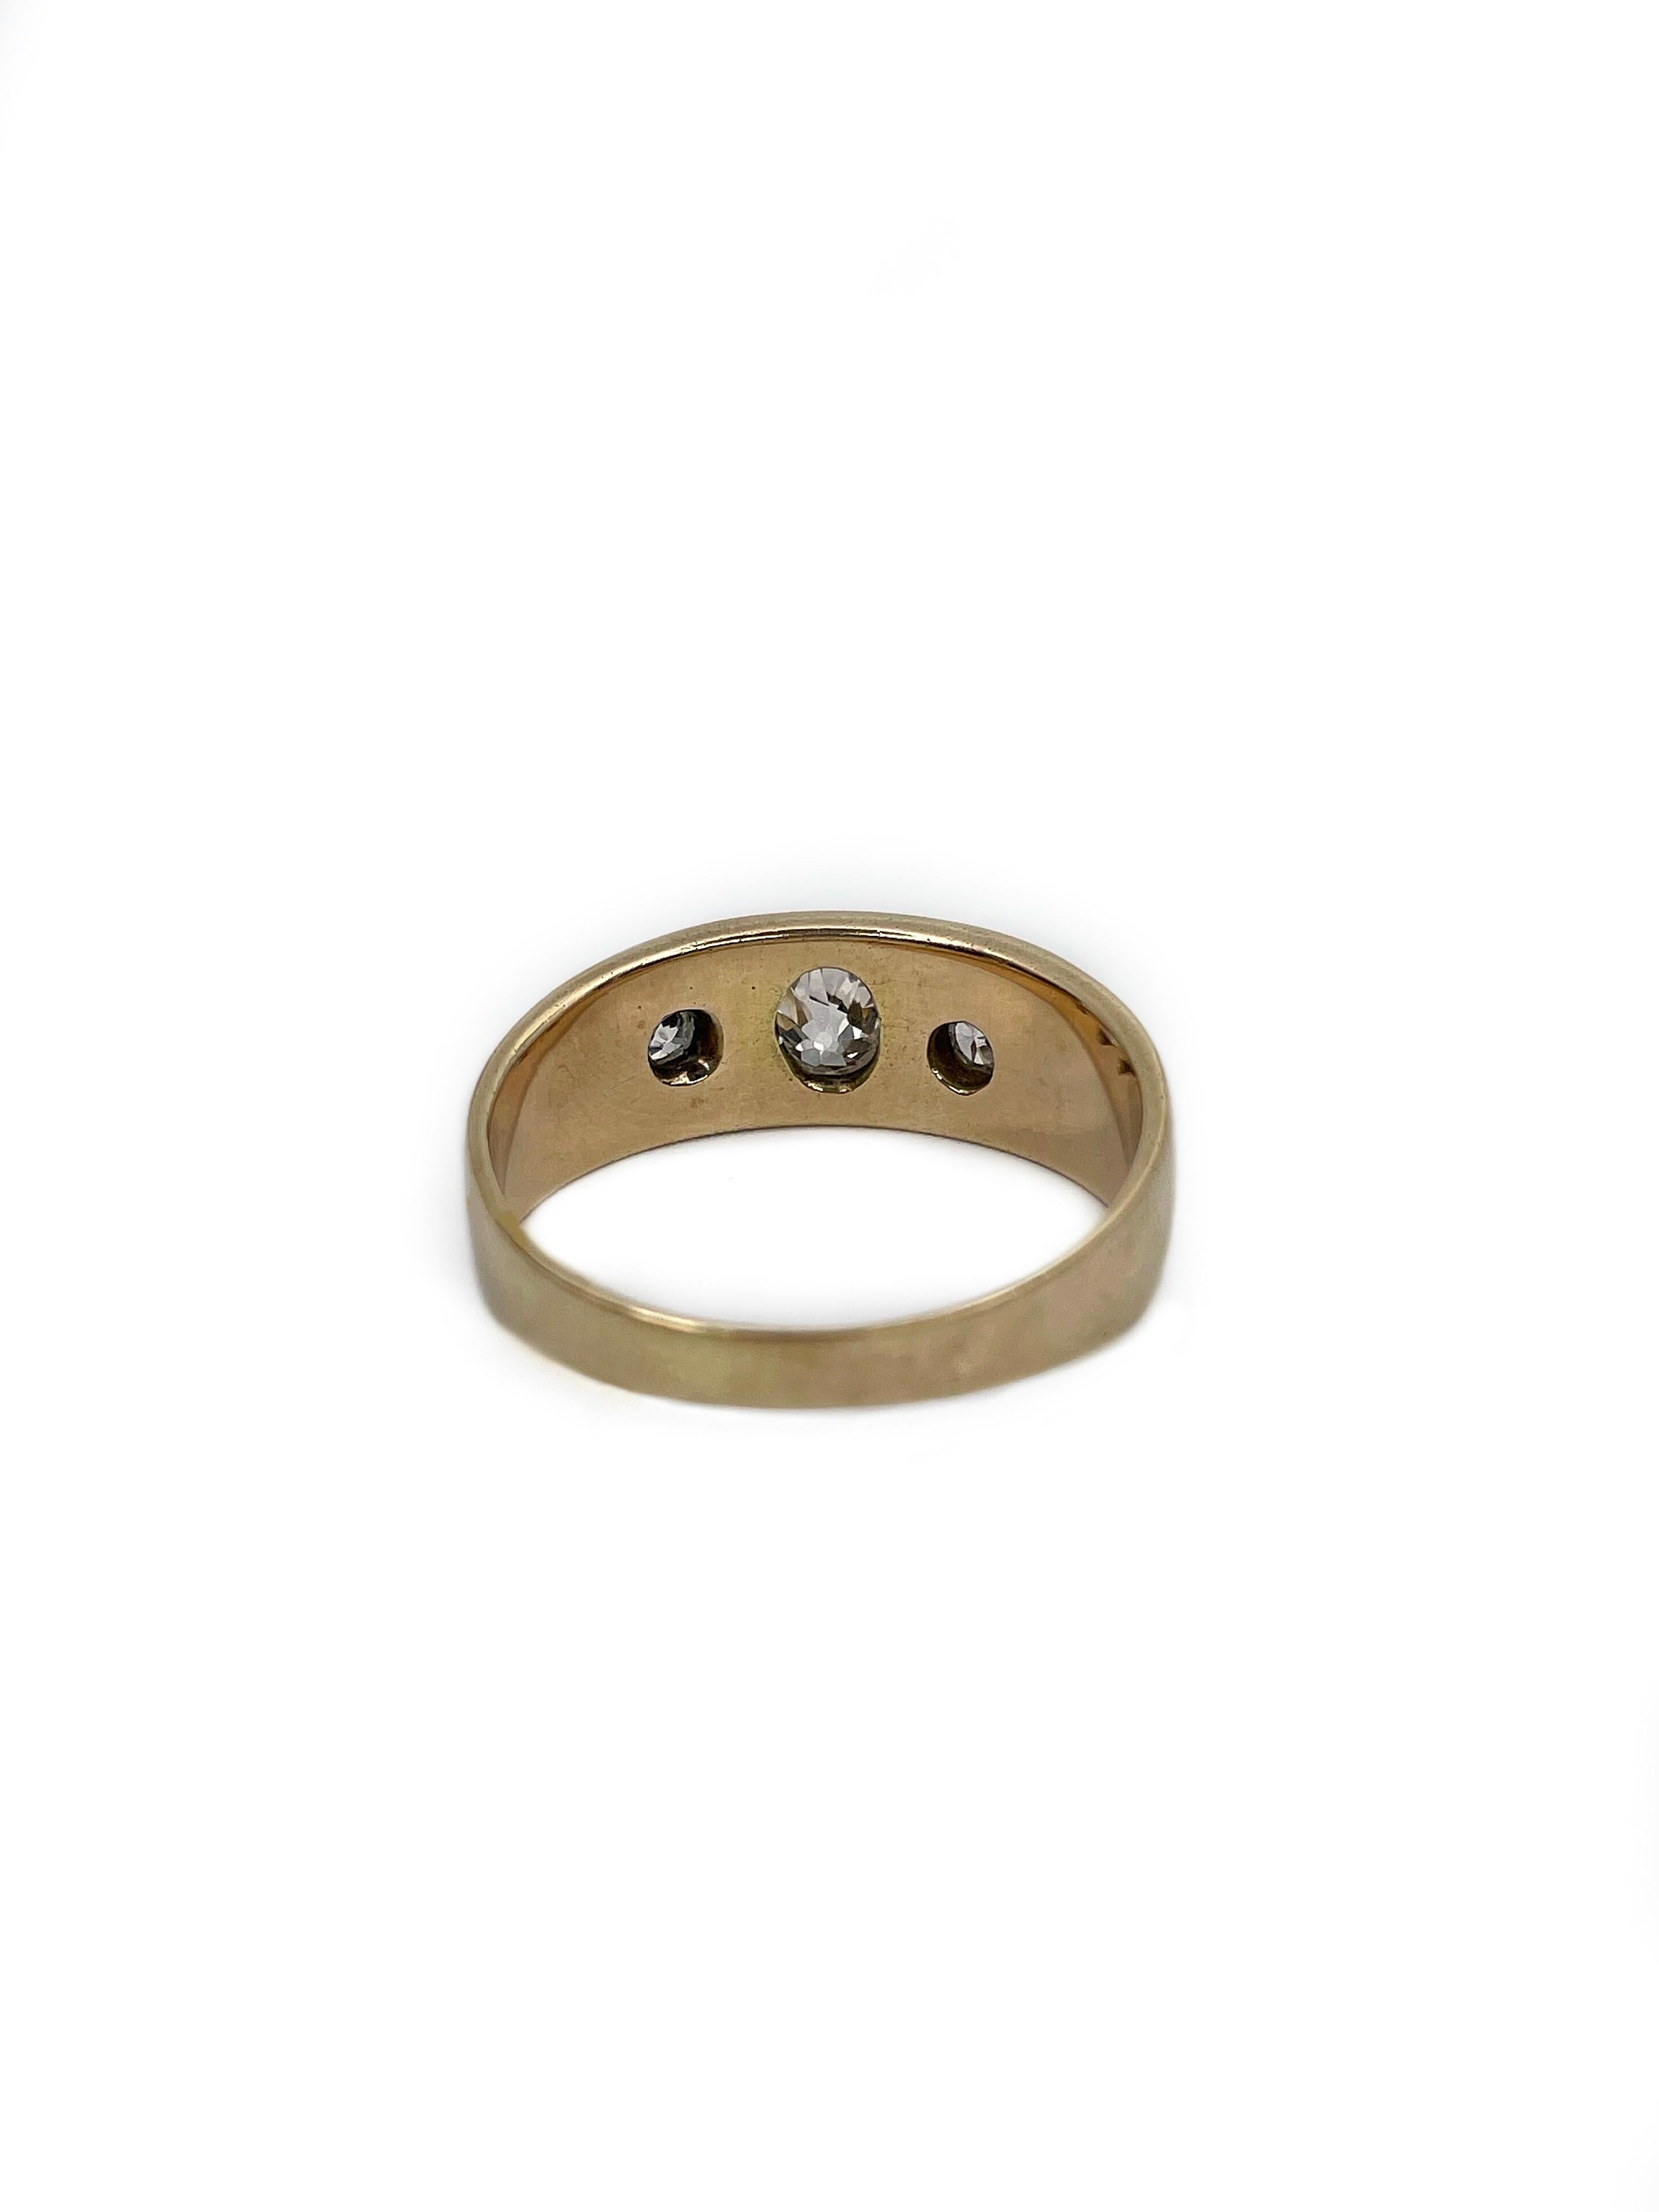 This is a typical Victorian three stone band ring crafted in 14K yellow gold. It features three round diamonds (W, SI-P1). The gypsy set gems weight 0.24ct in total. 

Three stone rings are rich with symbolism and personal significance. The three